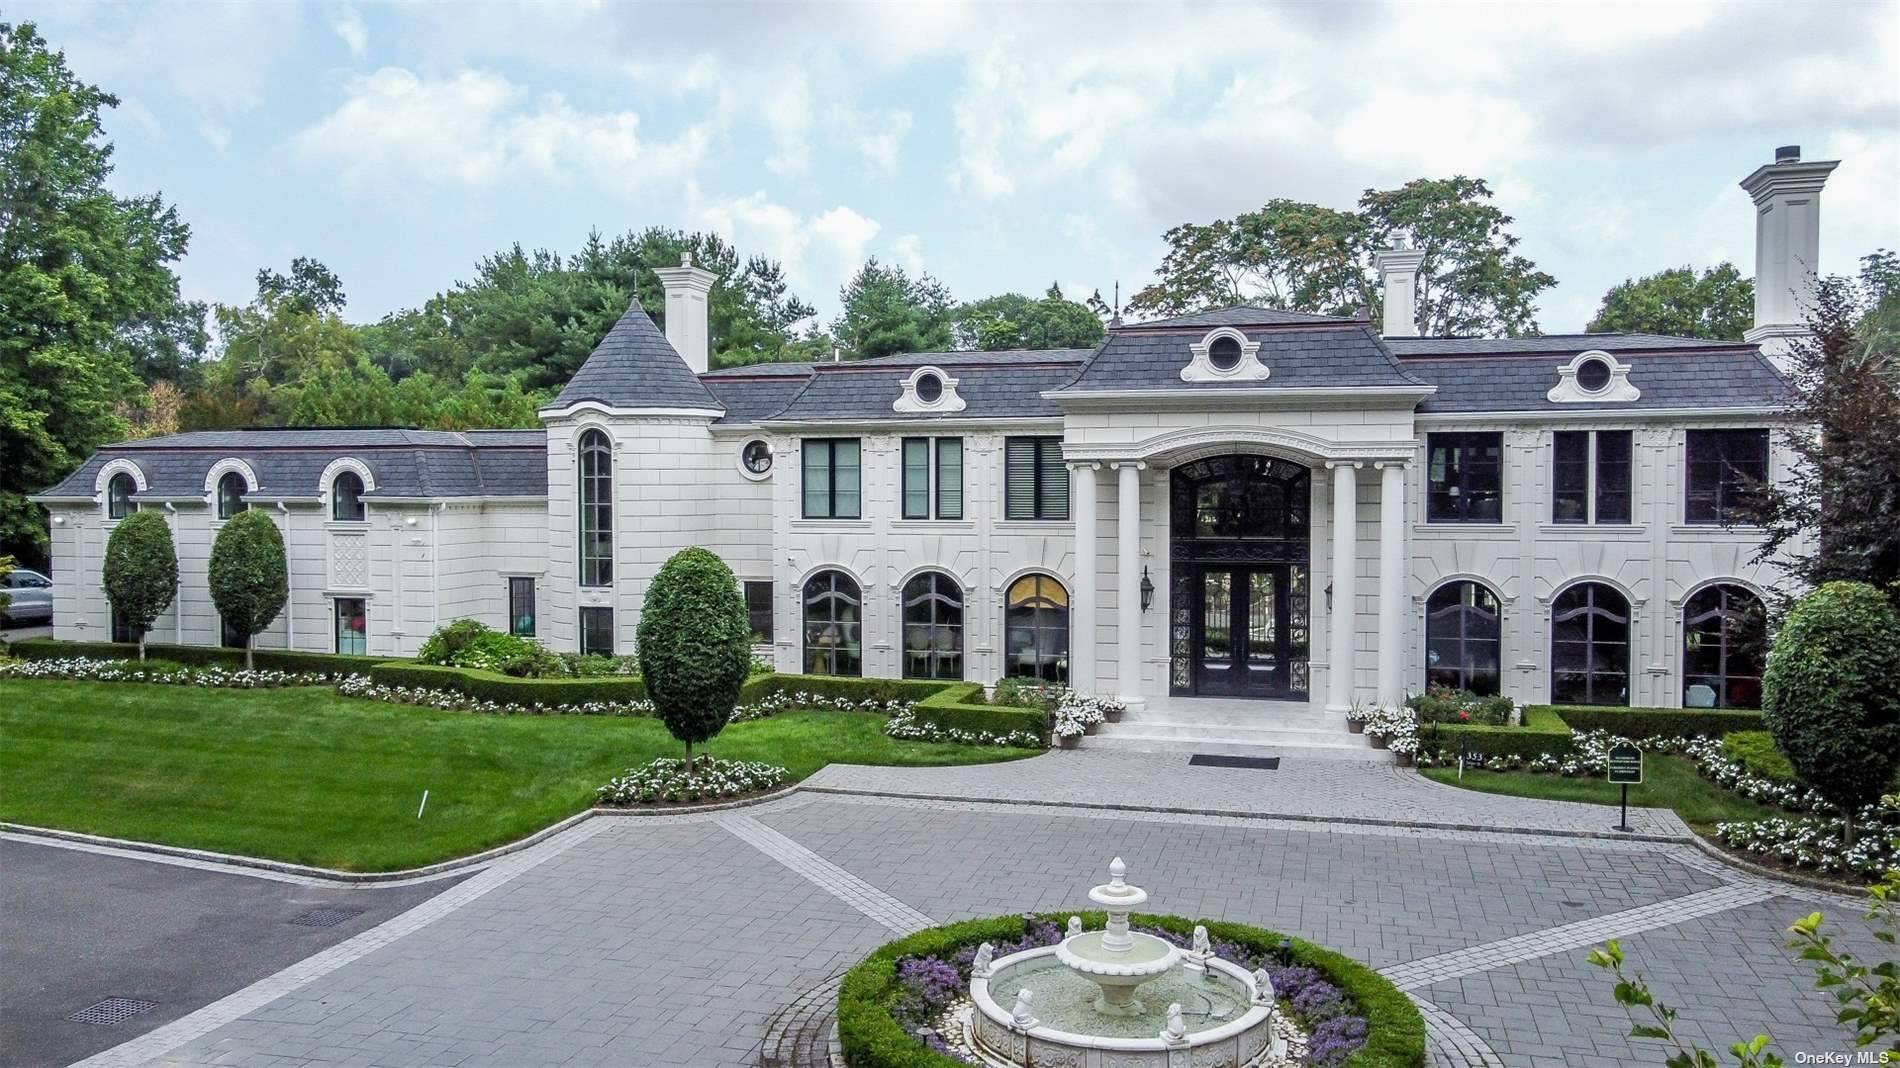 Entertainer's Dream Completely Private 2 Acres Estate, No Neighbors in Sight.